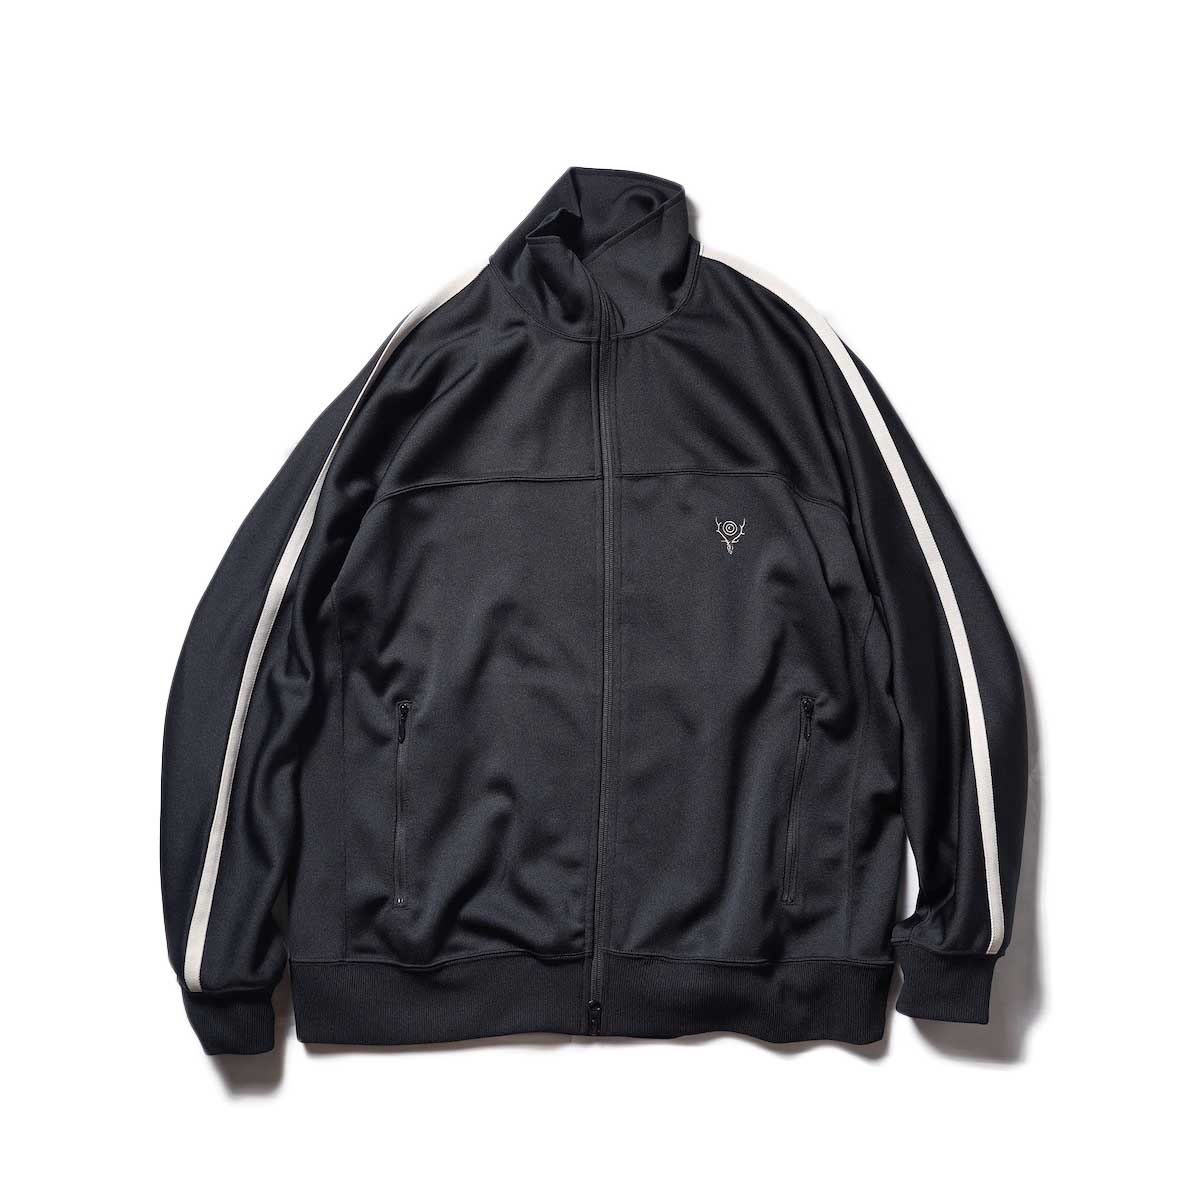 South2 West8 / Trainer Jacket - Poly Smooth (Black)